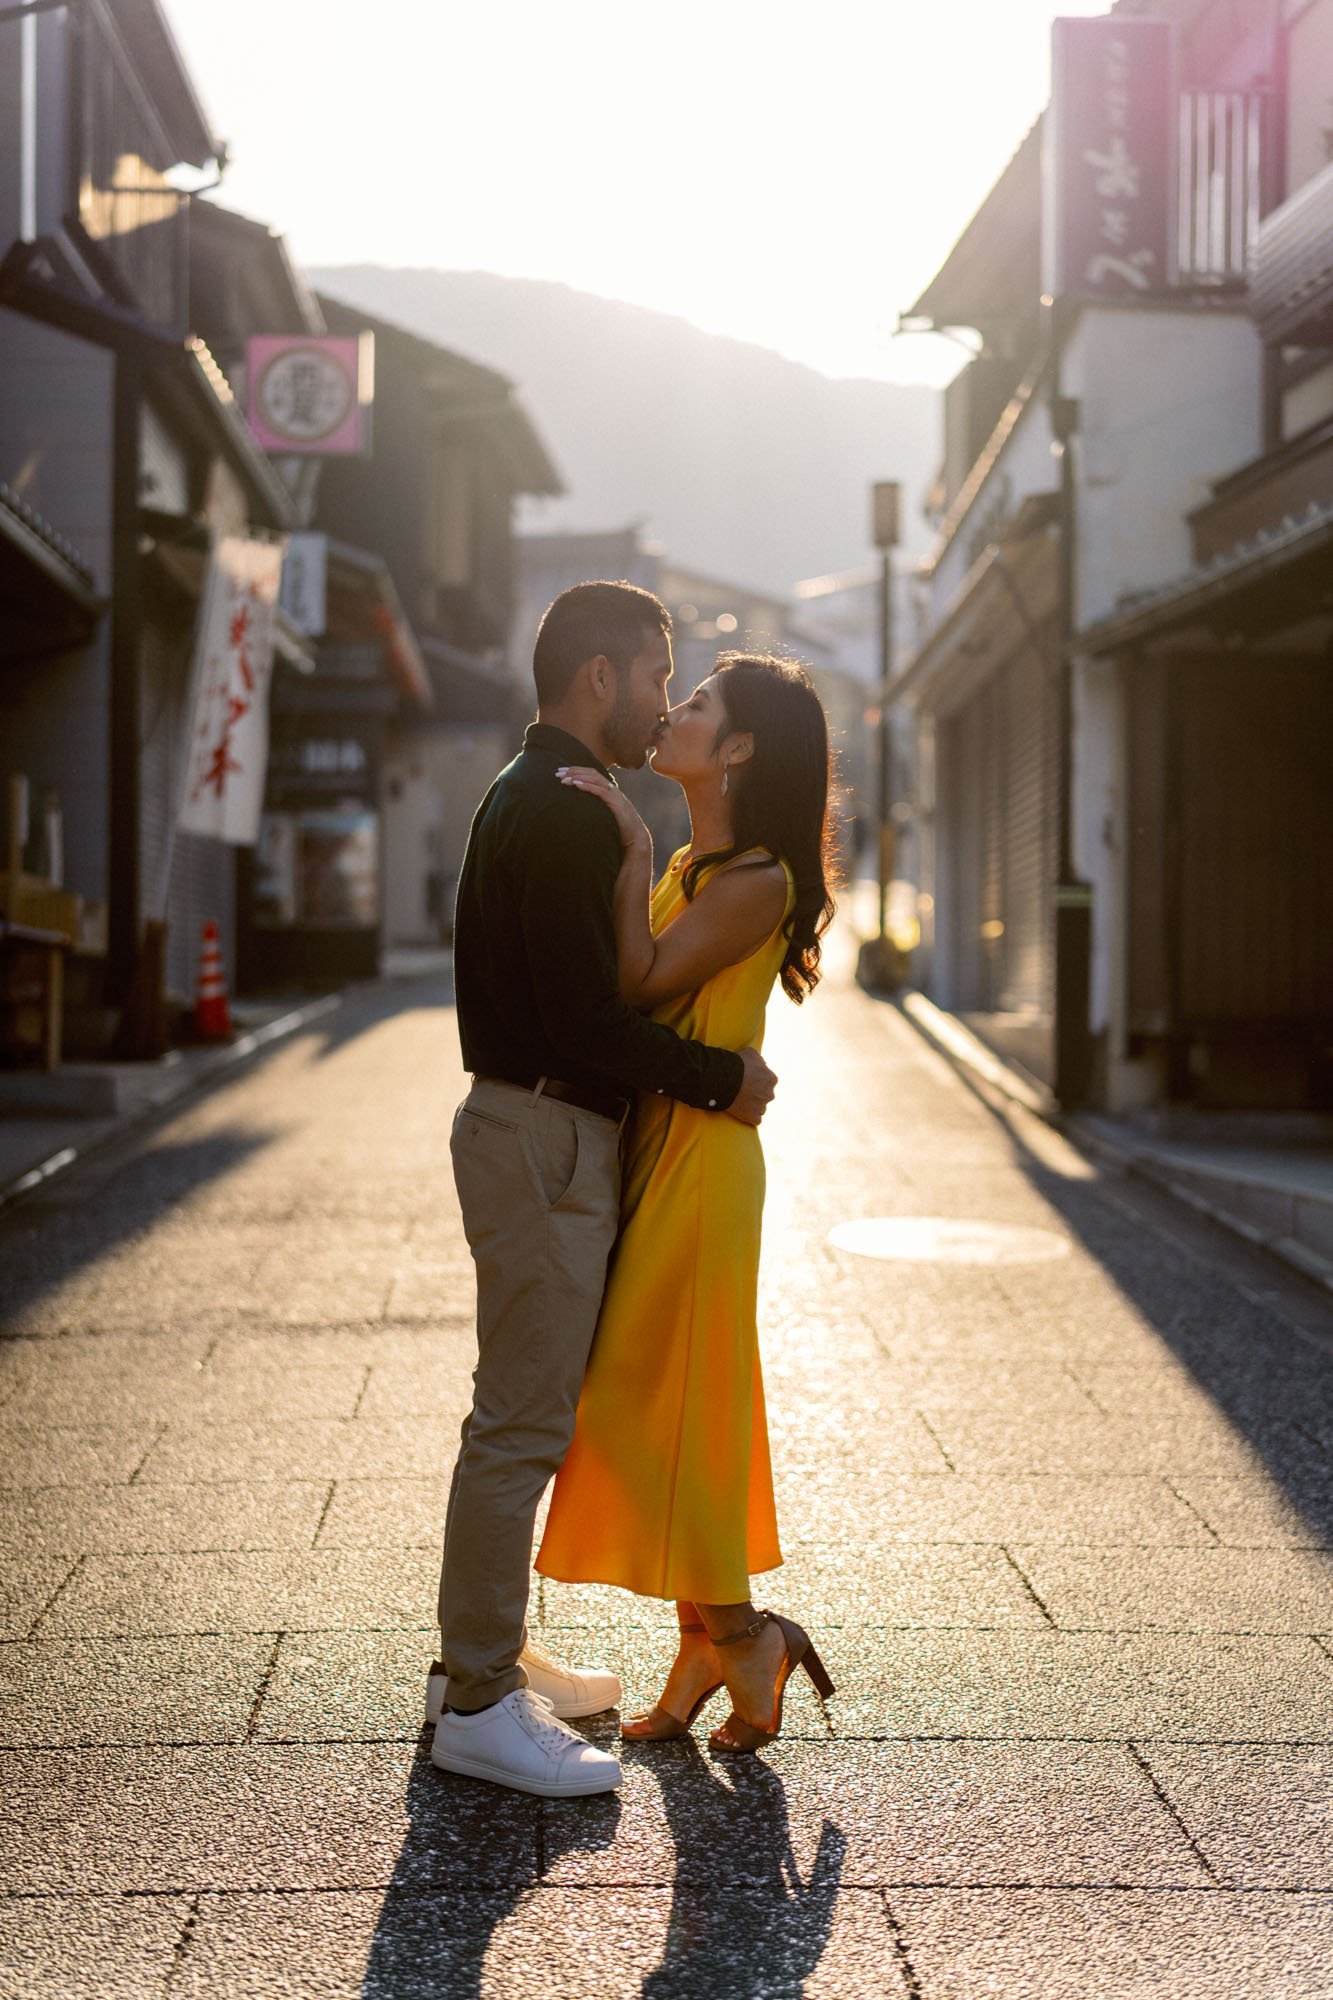 Engagement photographer in Kyoto, Japan